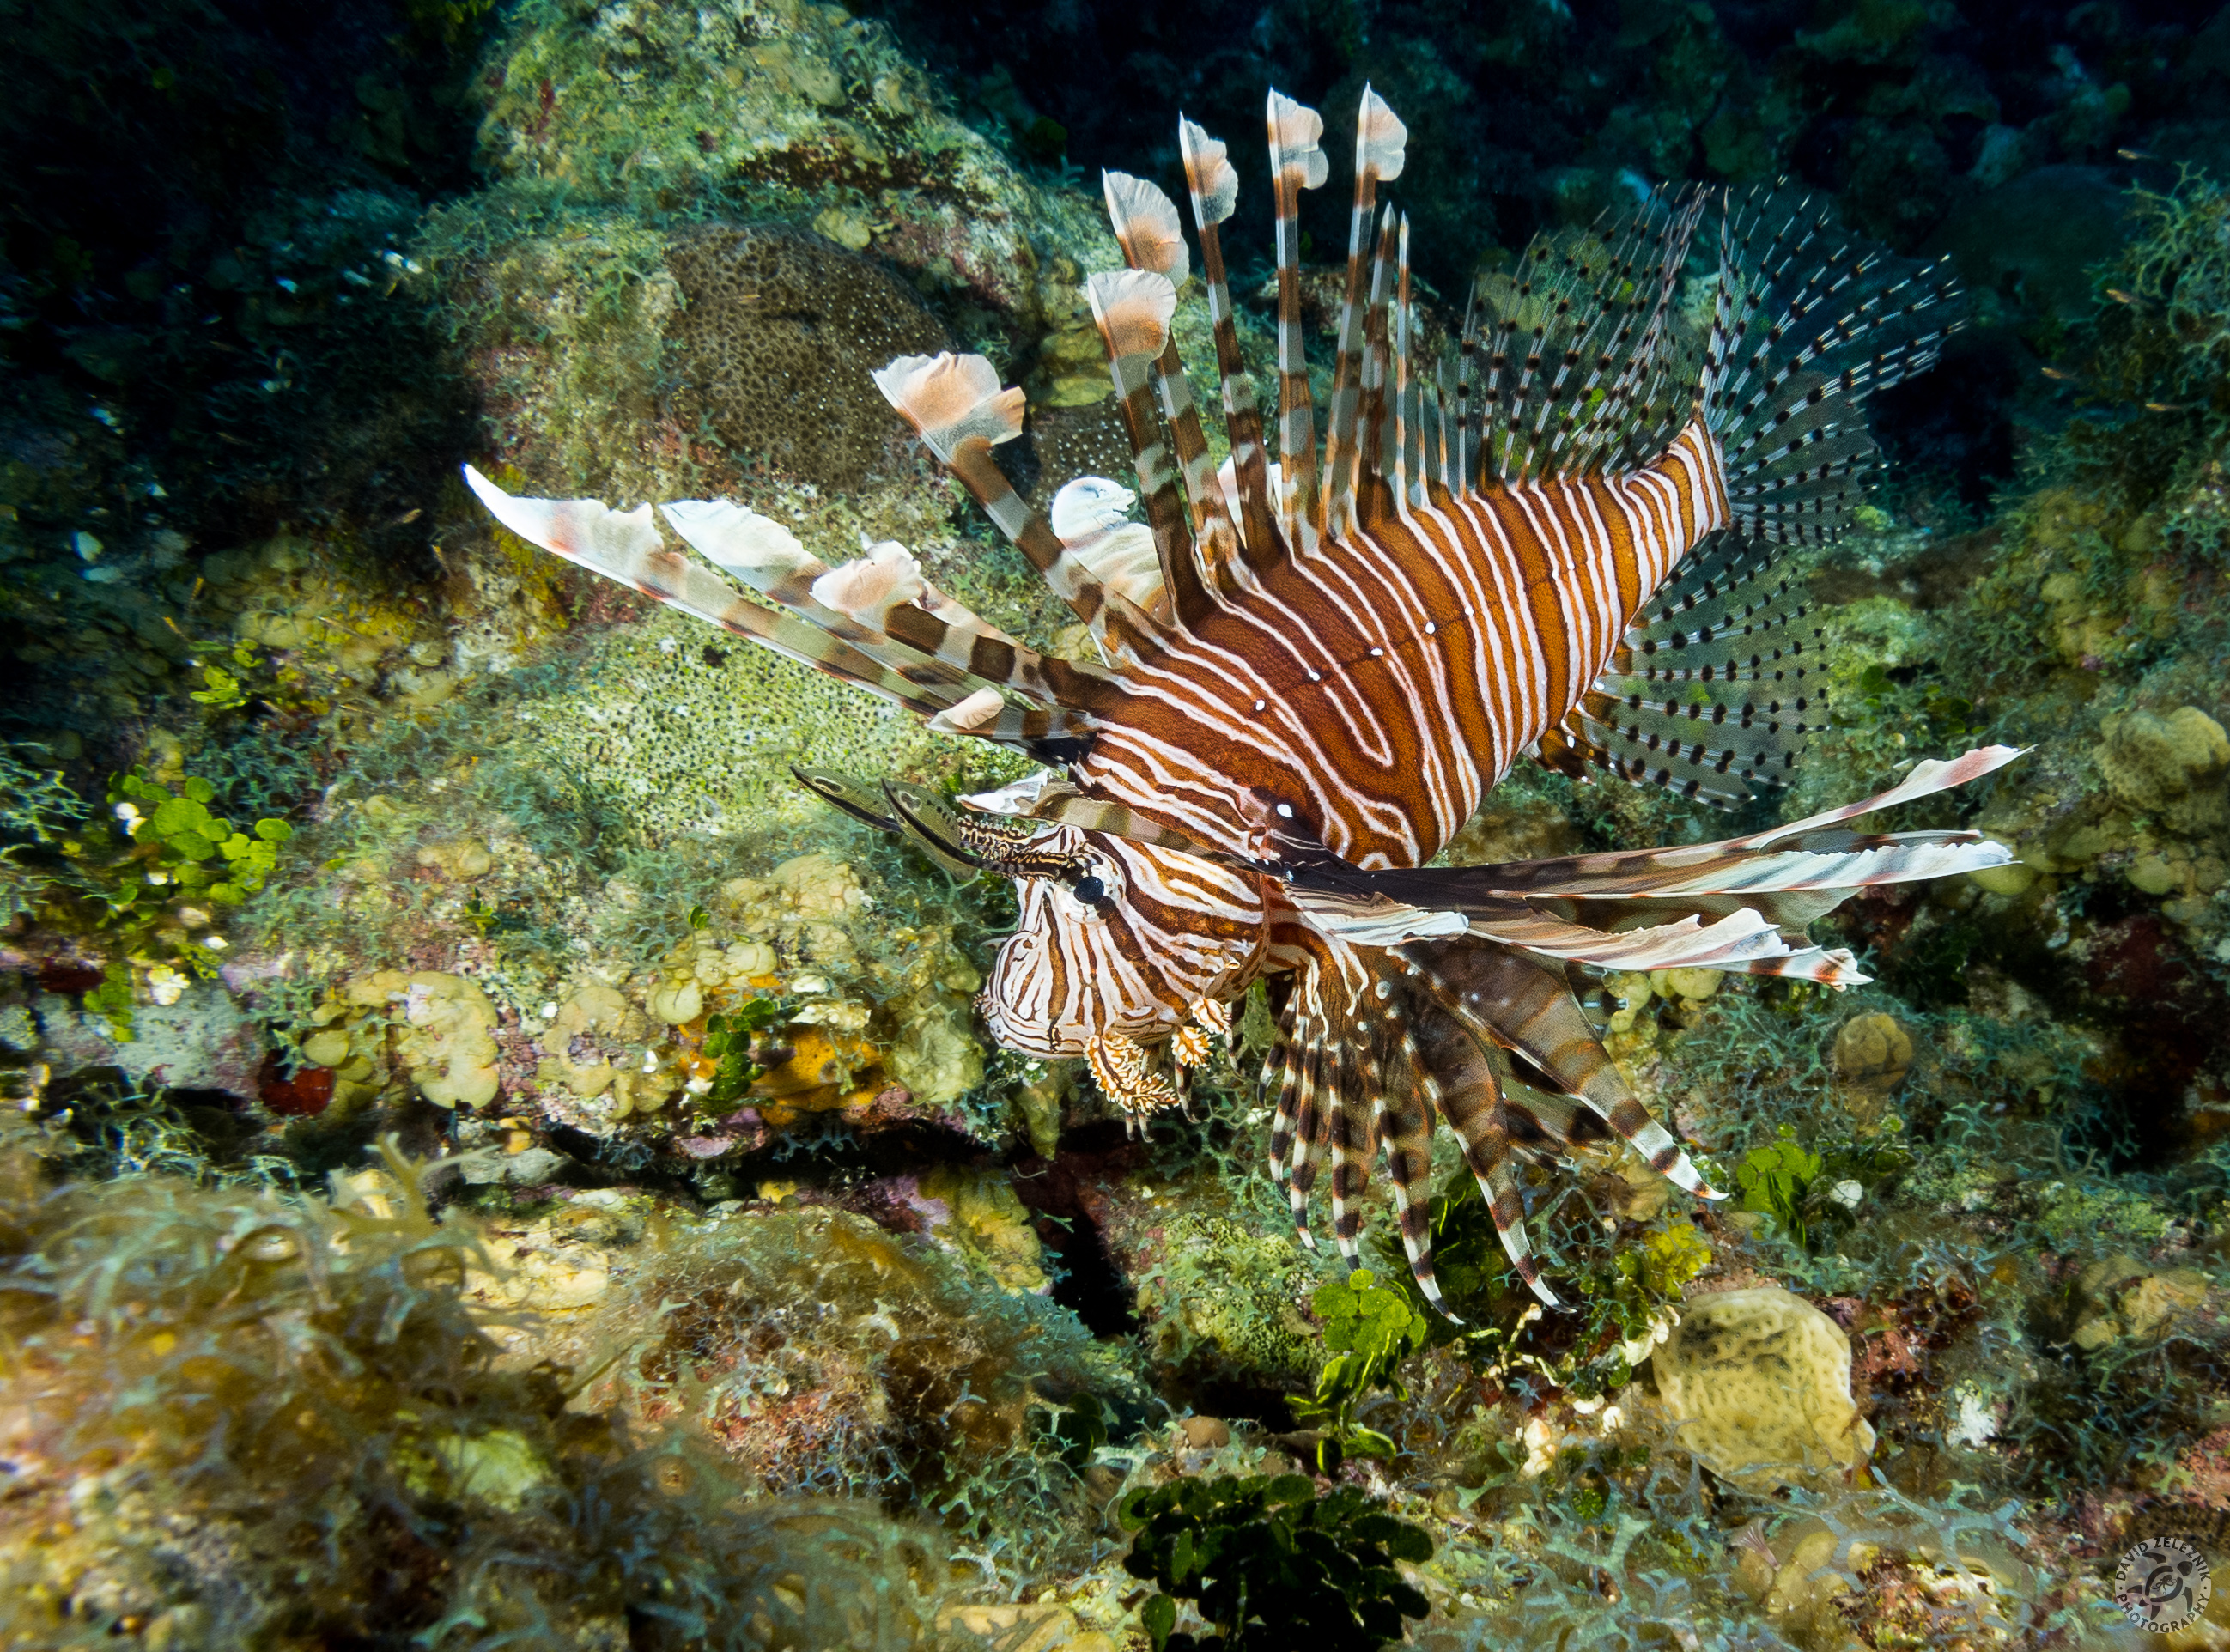 Red Lionfish, although pretty, are an invasive species from the Indo-Pacific that started proliferating in the Caribbean due to the lack of natural predators. They are voracious eaters and are putting the indigenous marine species at risk.